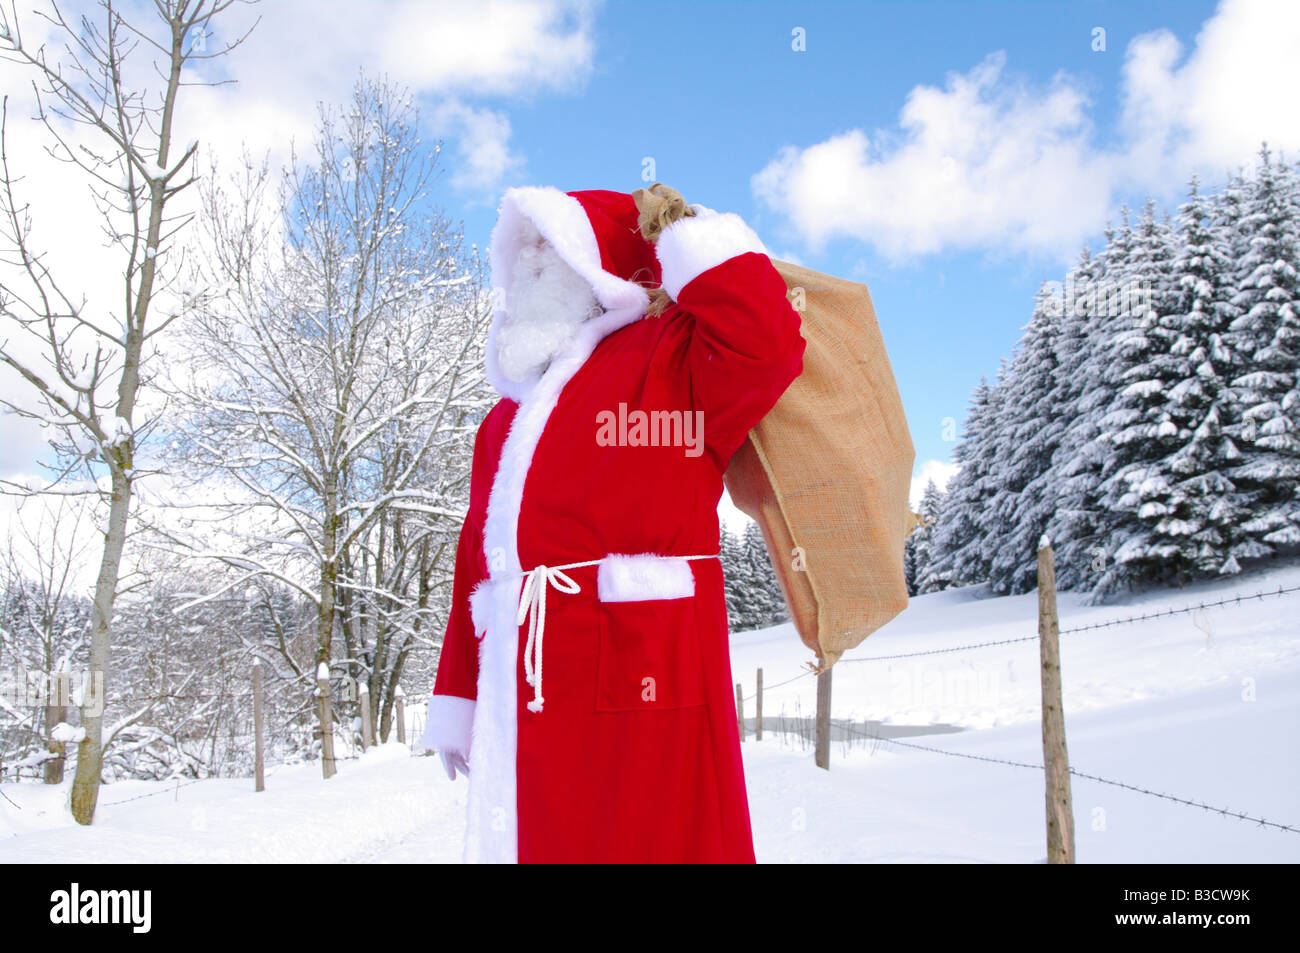 Santa Claus Father Christmas in a beautiful winter landscape Stock Photo